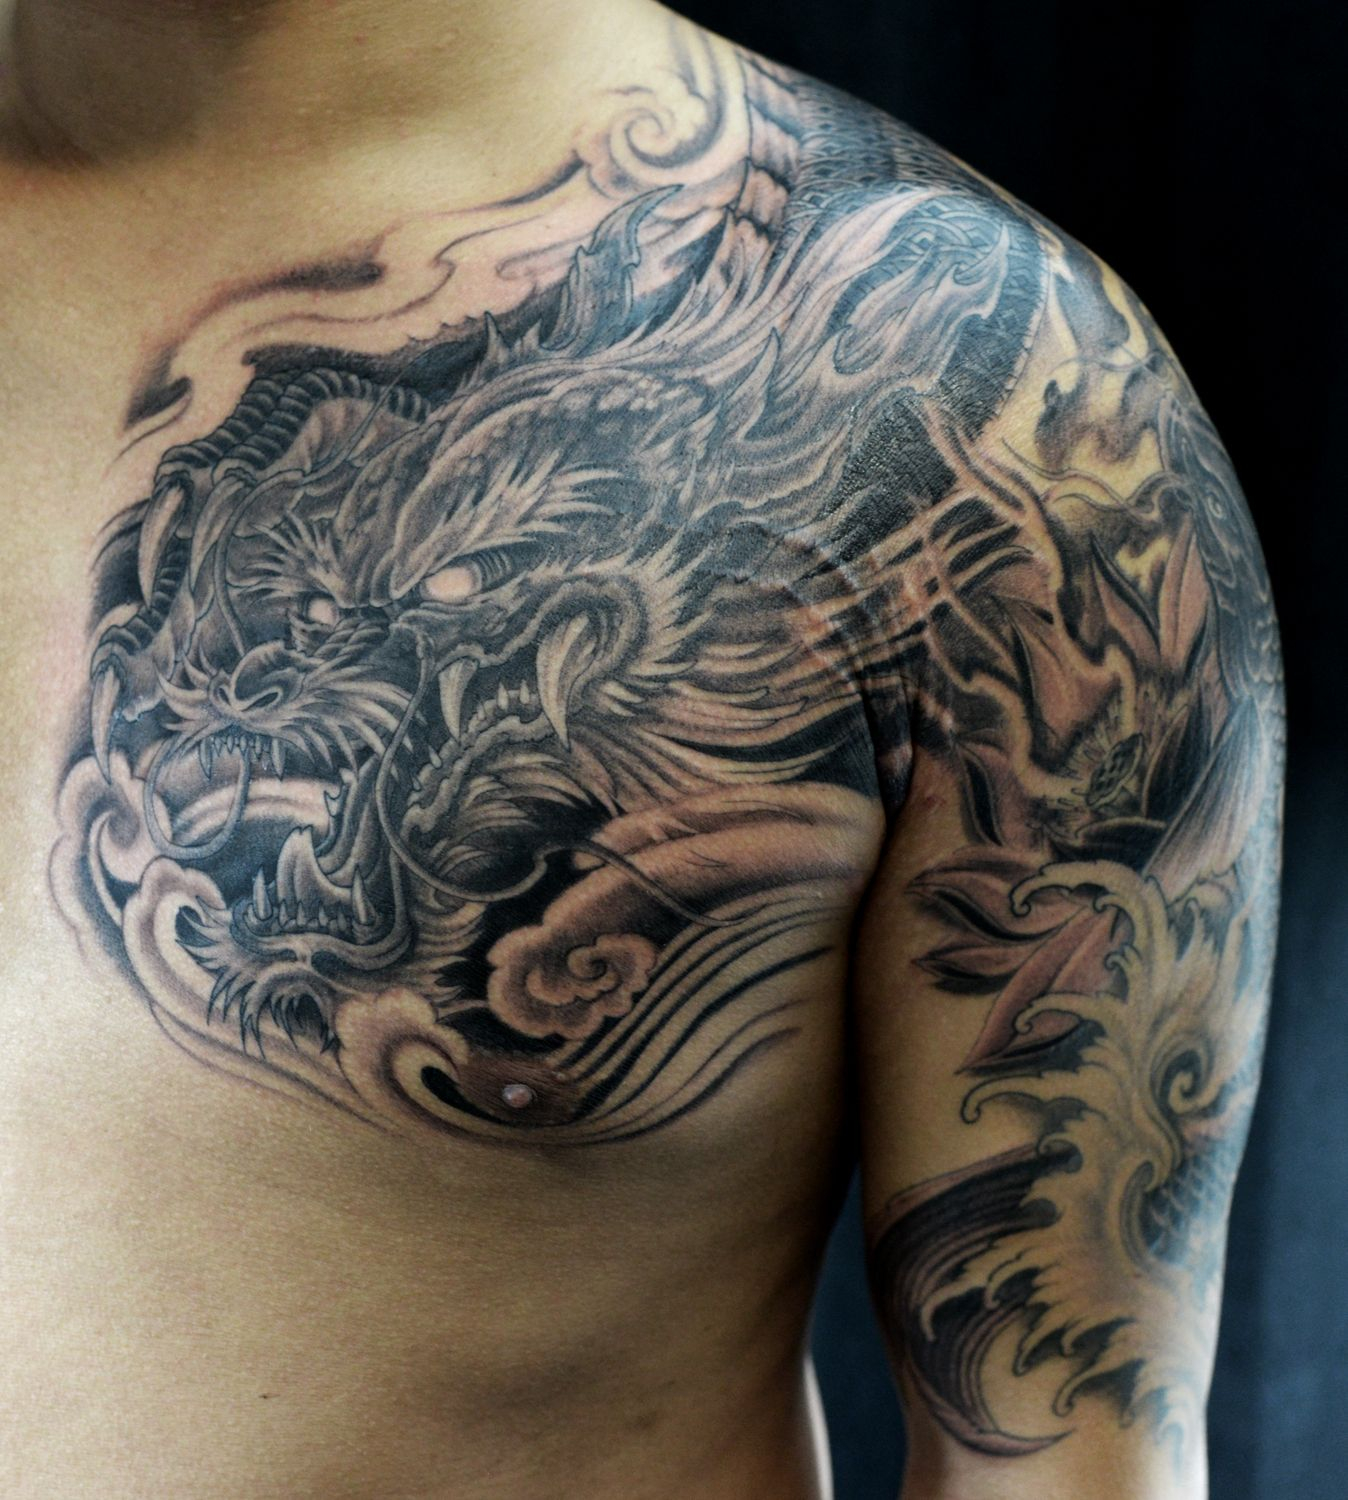 These Tattoos Start At The Shoulder And Stop At The Mid Bicep Or within measurements 1348 X 1500